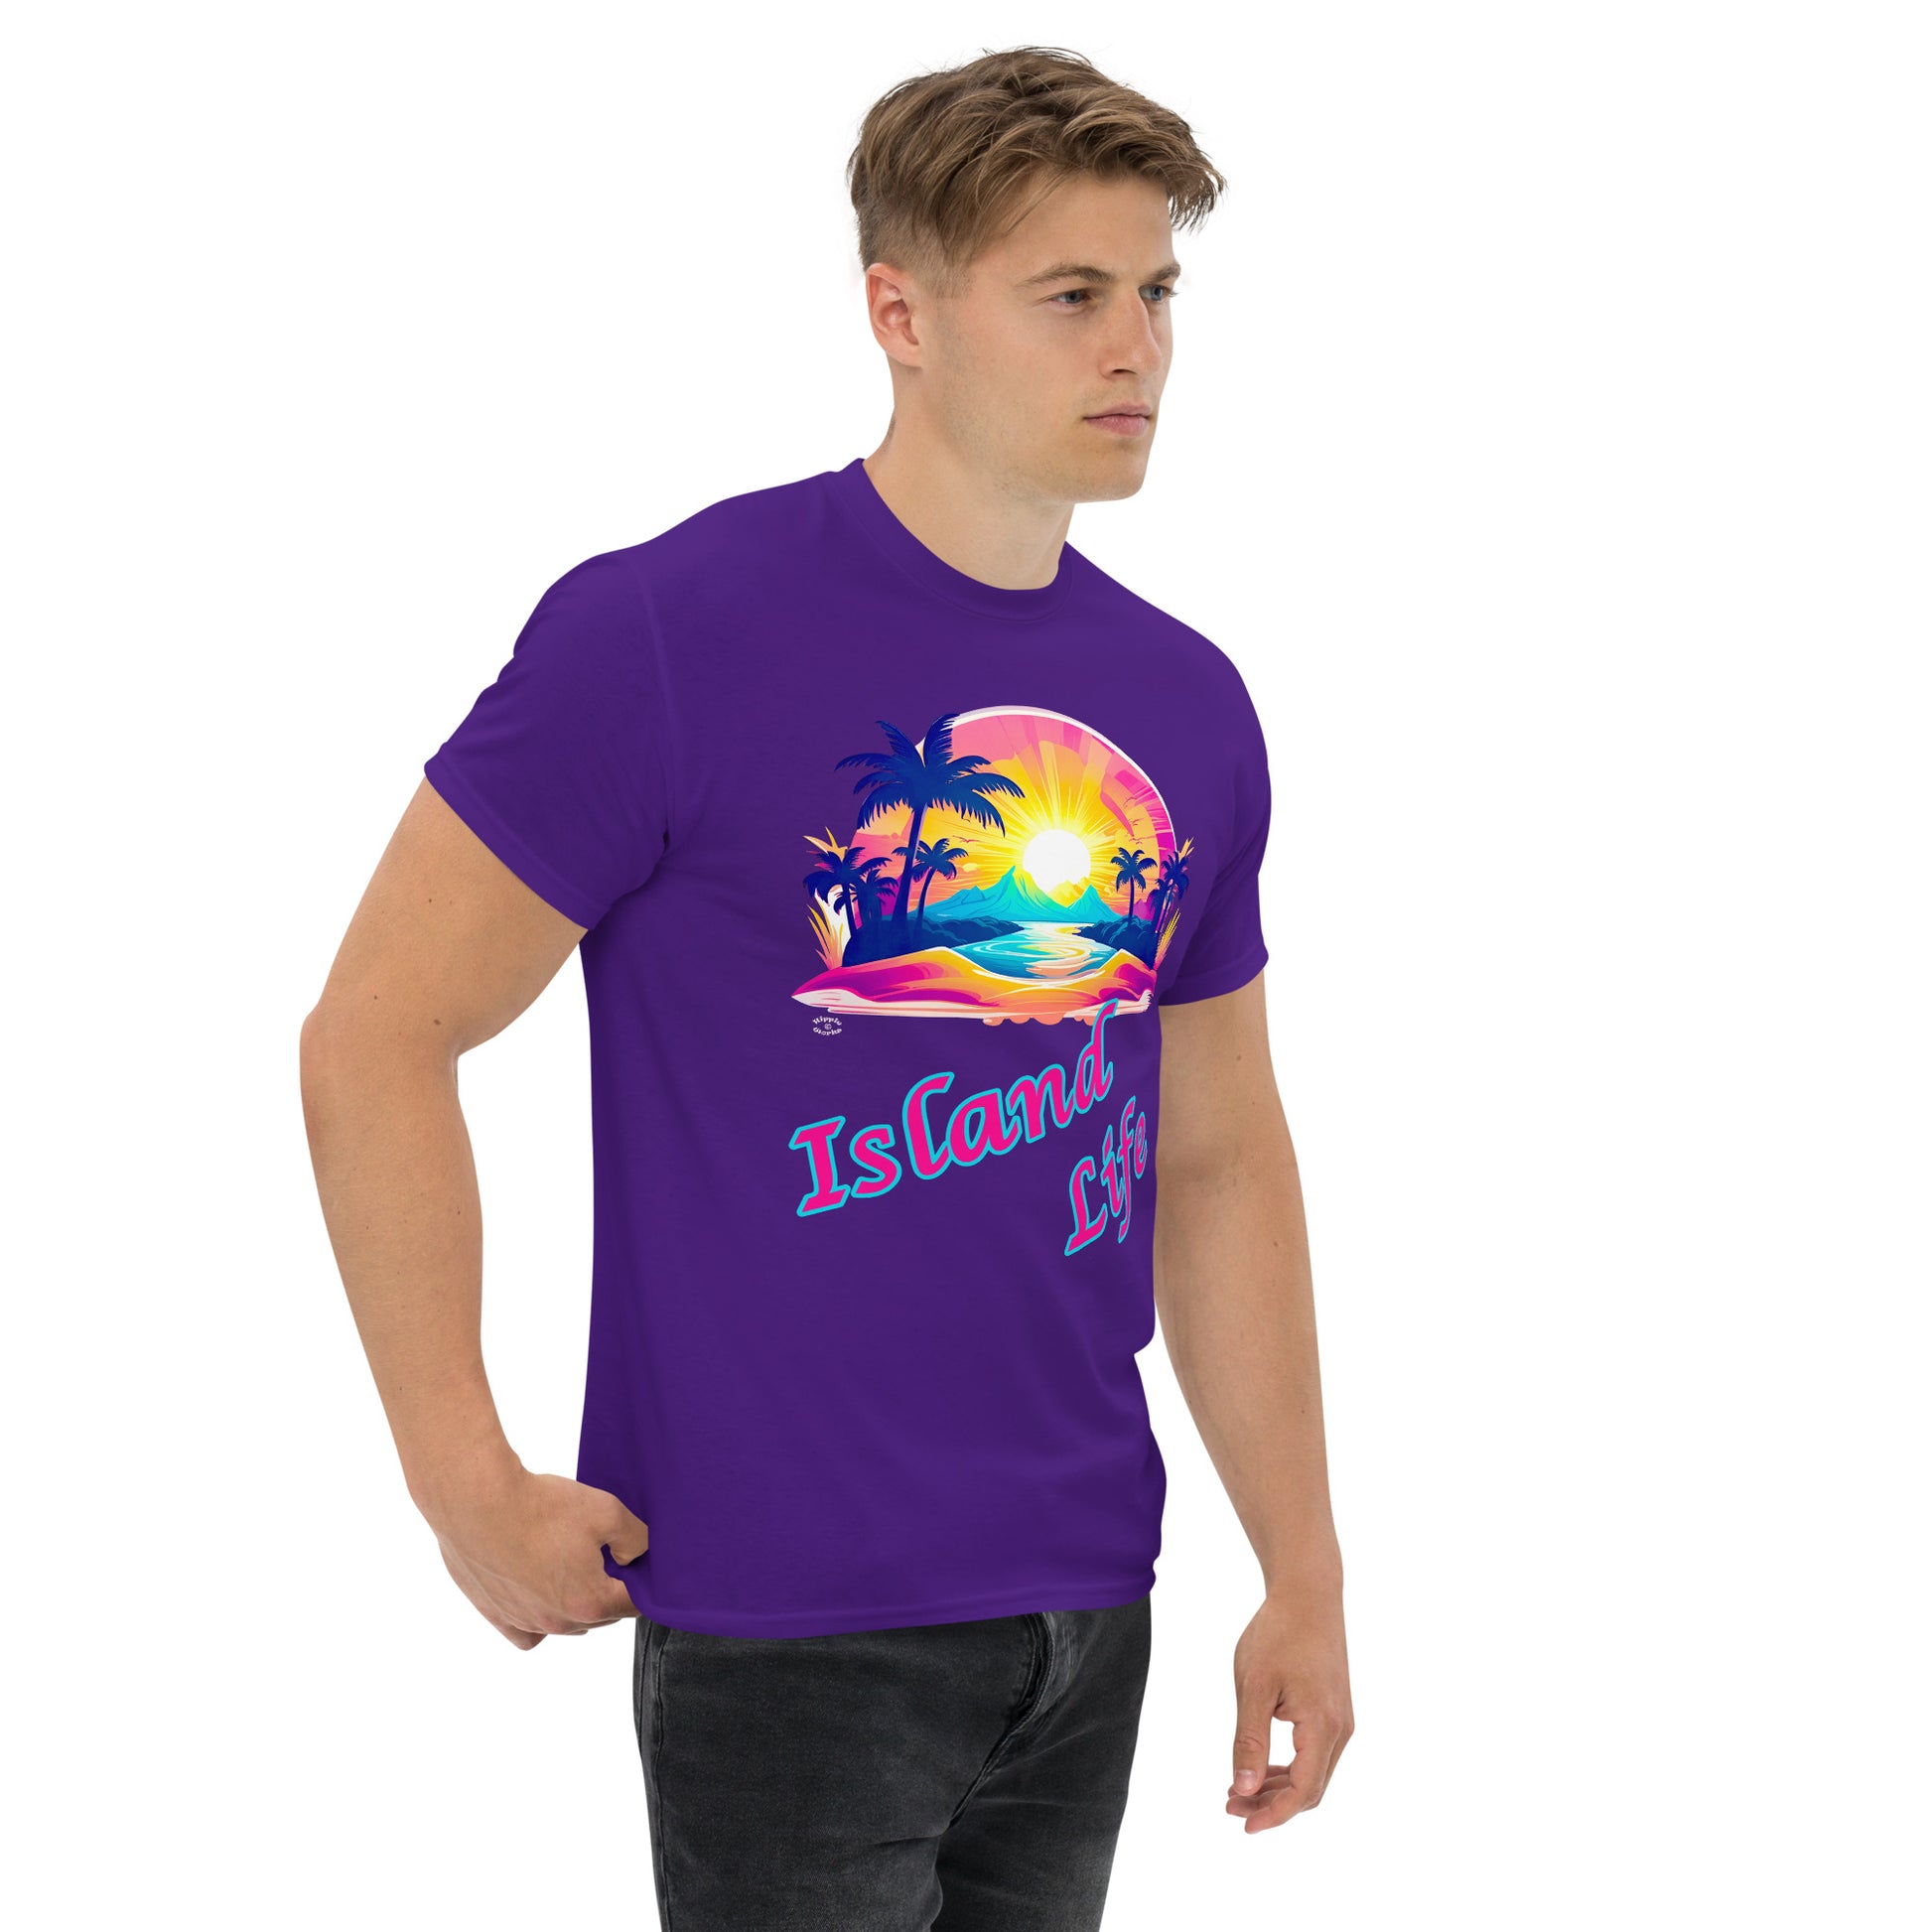 A picture of a man modeling a Men's Classic Tee / Tshirt with a large picture on the front of a tropical island paradise and the text Island Life underneath - front right - purple